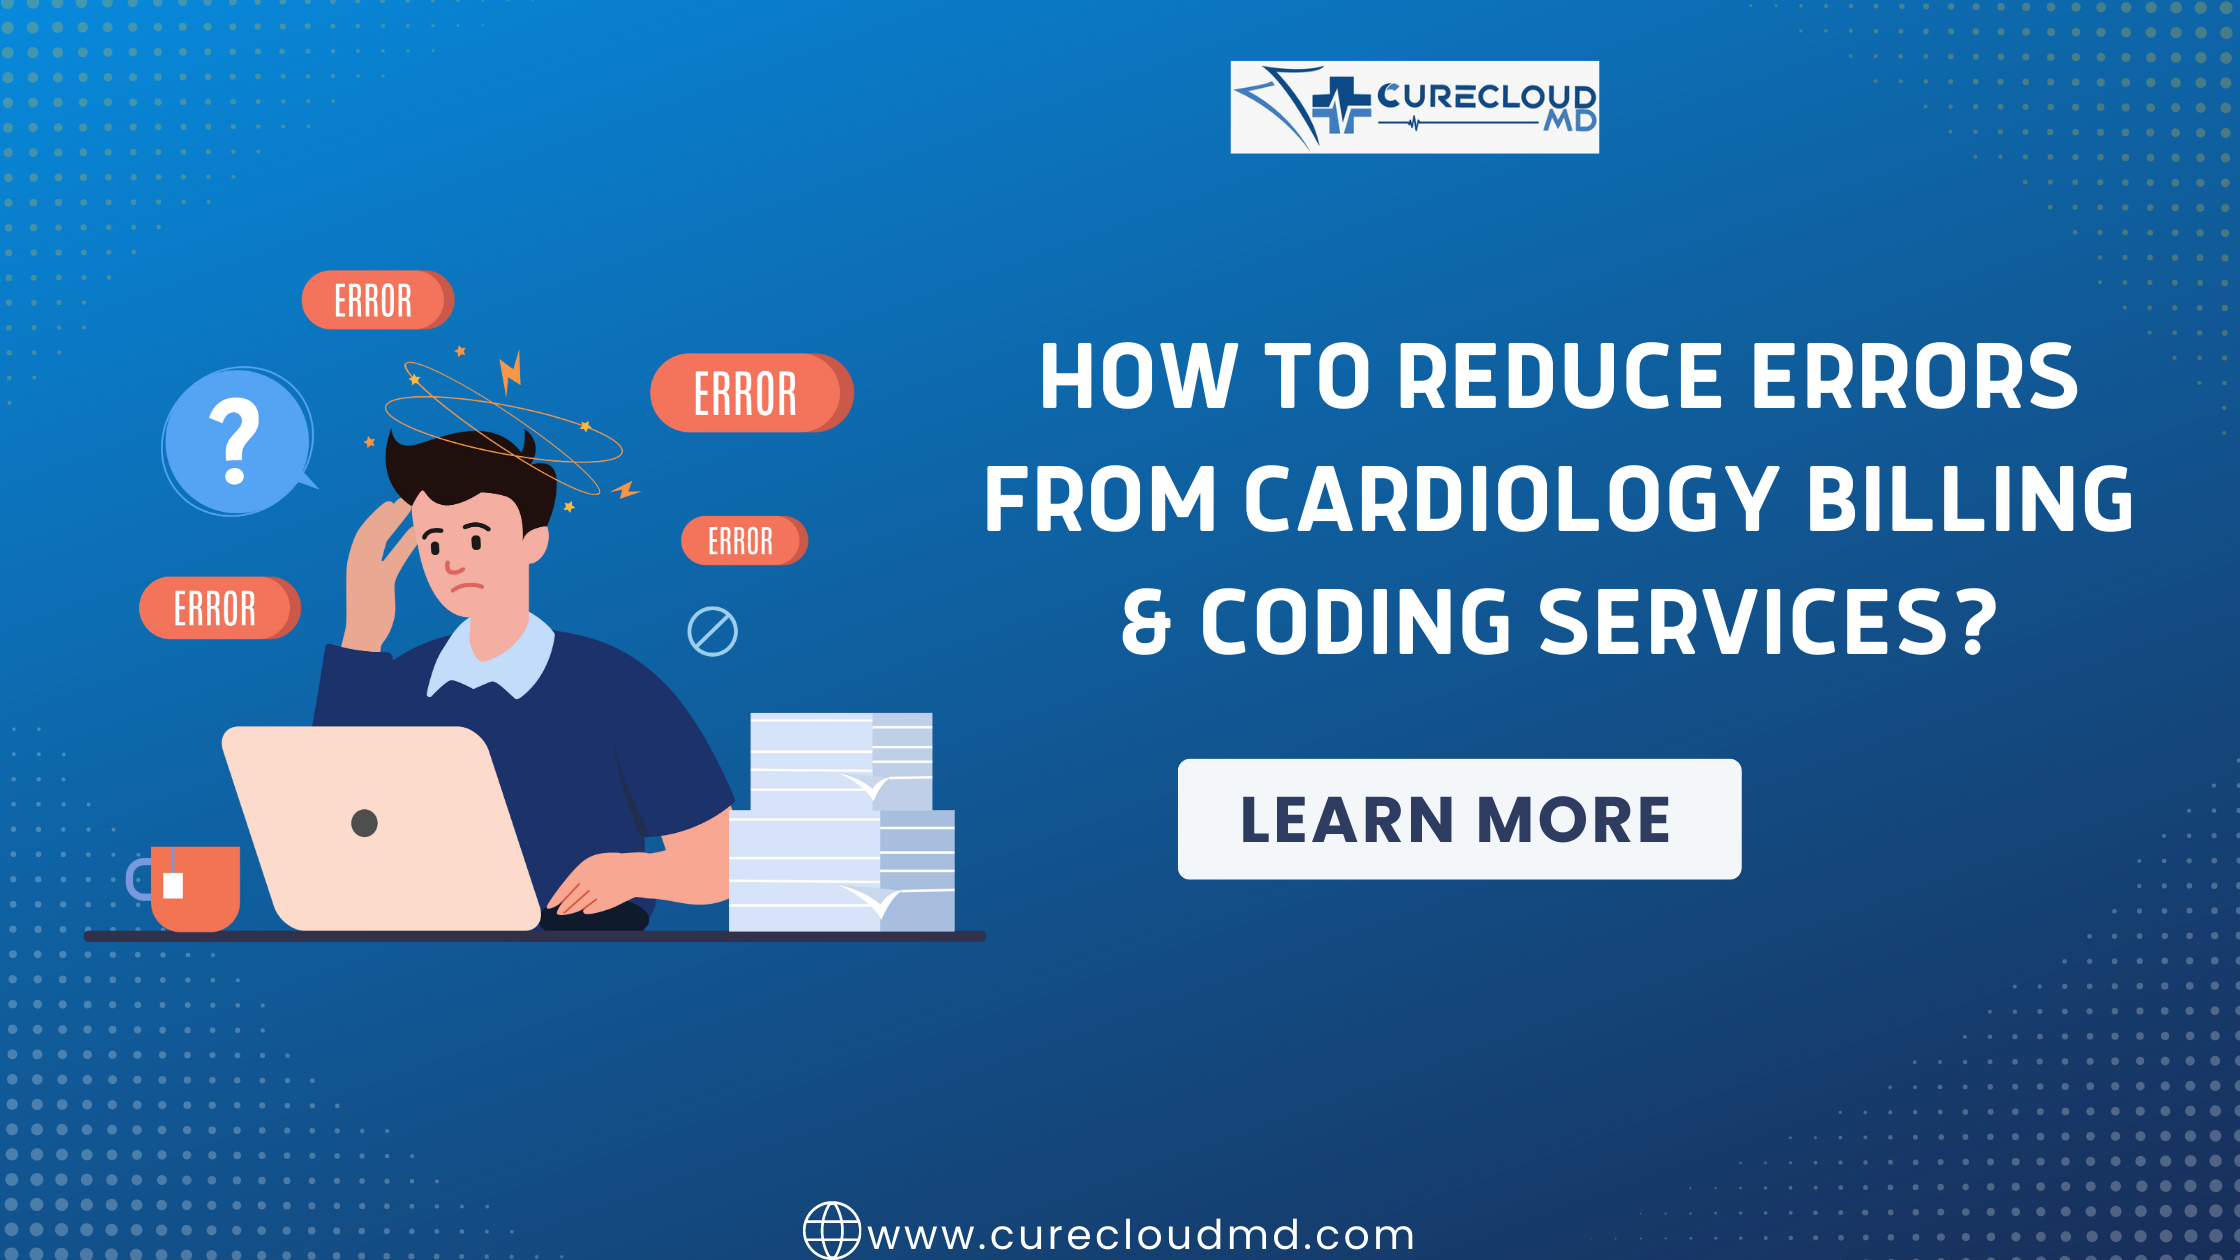 How To Reduce Errors From Cardiology Billing & Coding Services?